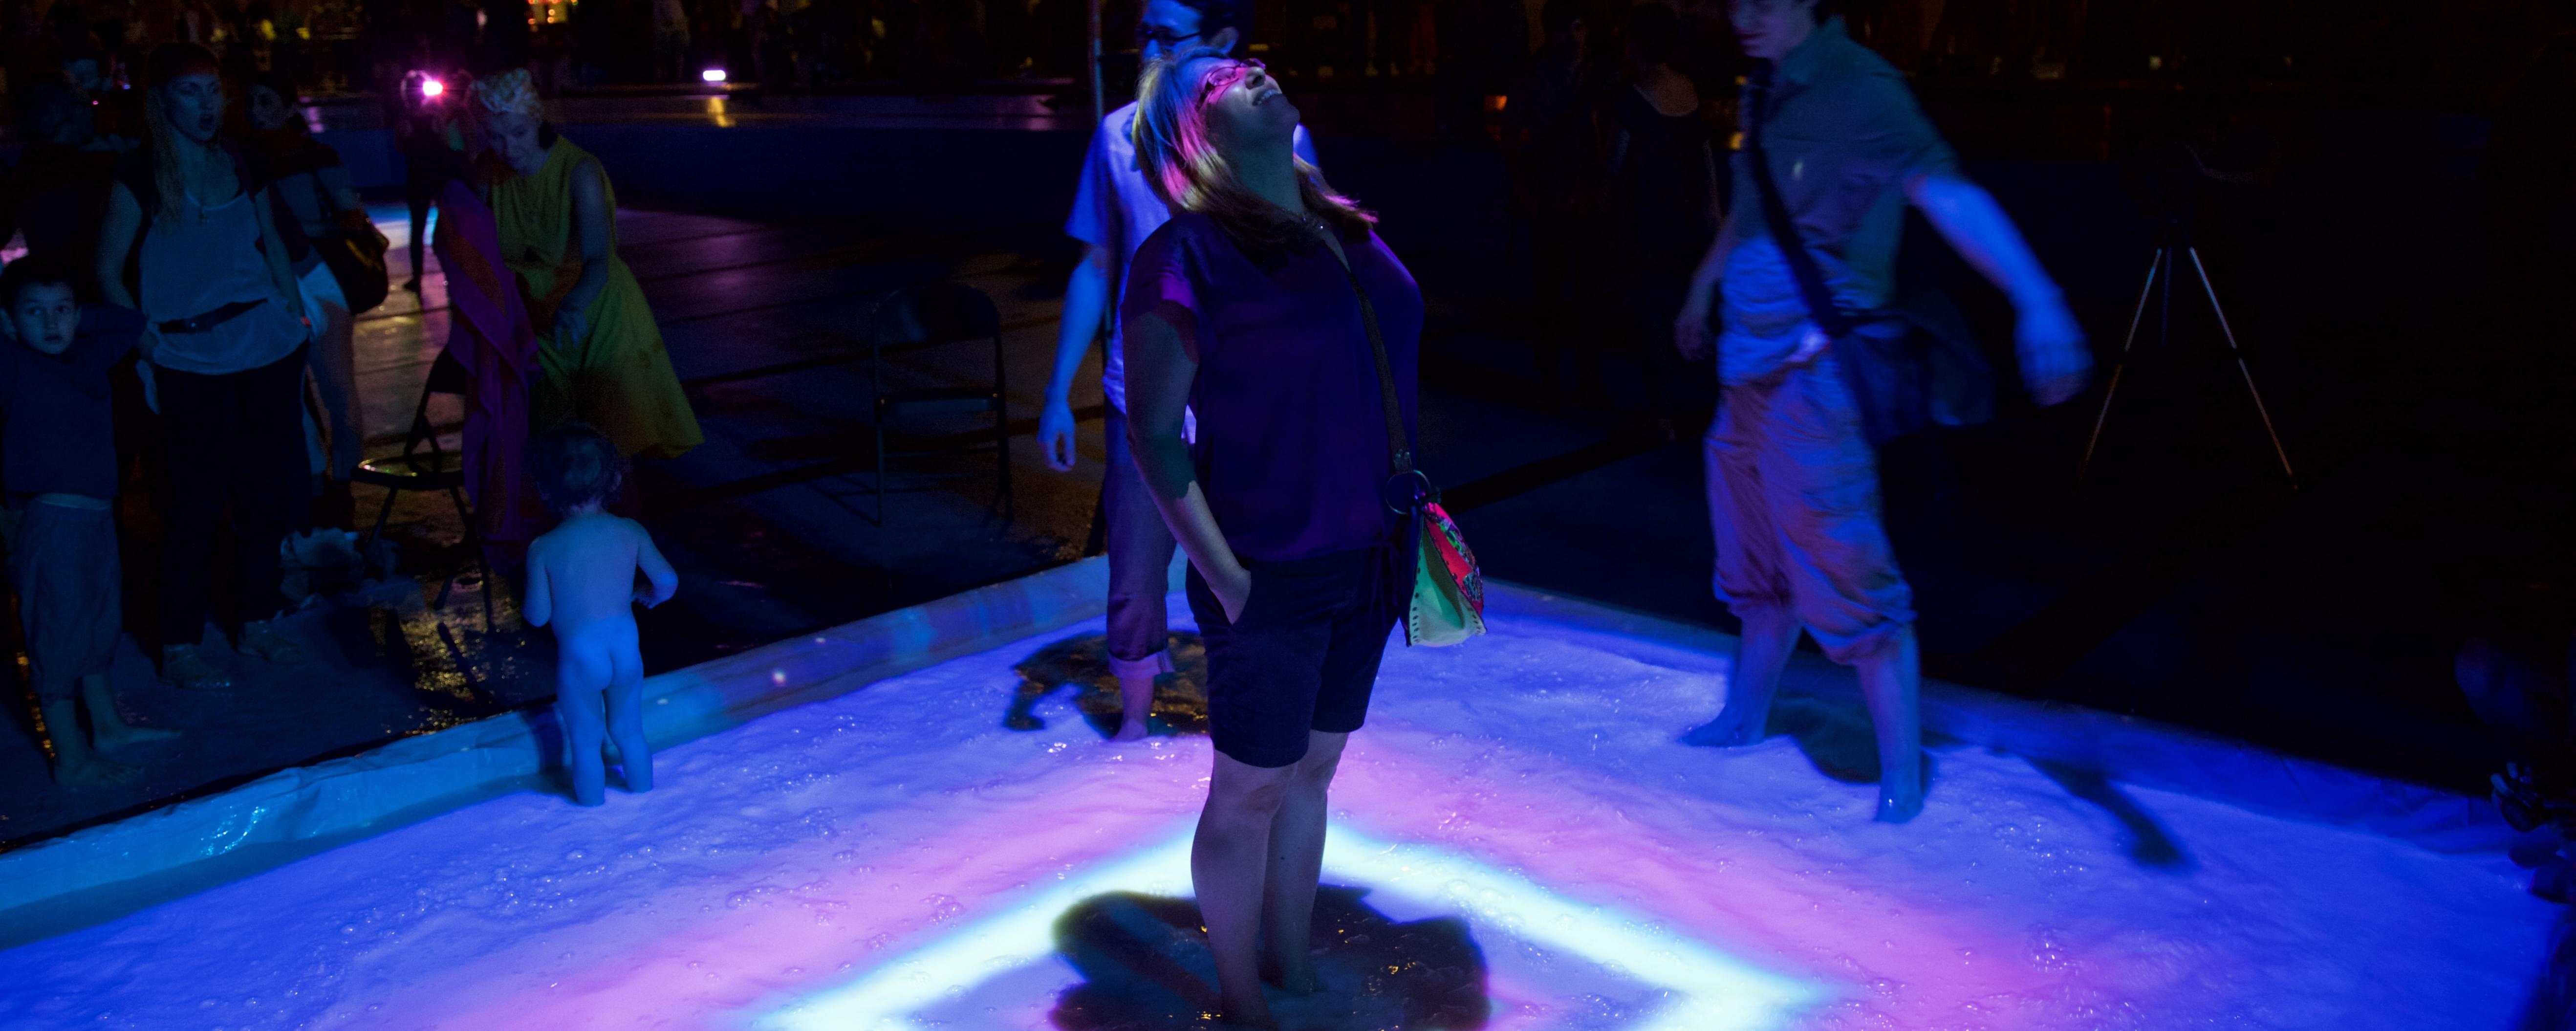 Nighttime photograph of a woman standing in the middle of a 8 inch high pool. Projected from above is a crazy multi-colored lightshow that covers her eyes in a ray of purple light while the liquid she's standing in (milk, btw) catches the purple, blue, and violet rays that fall around her.